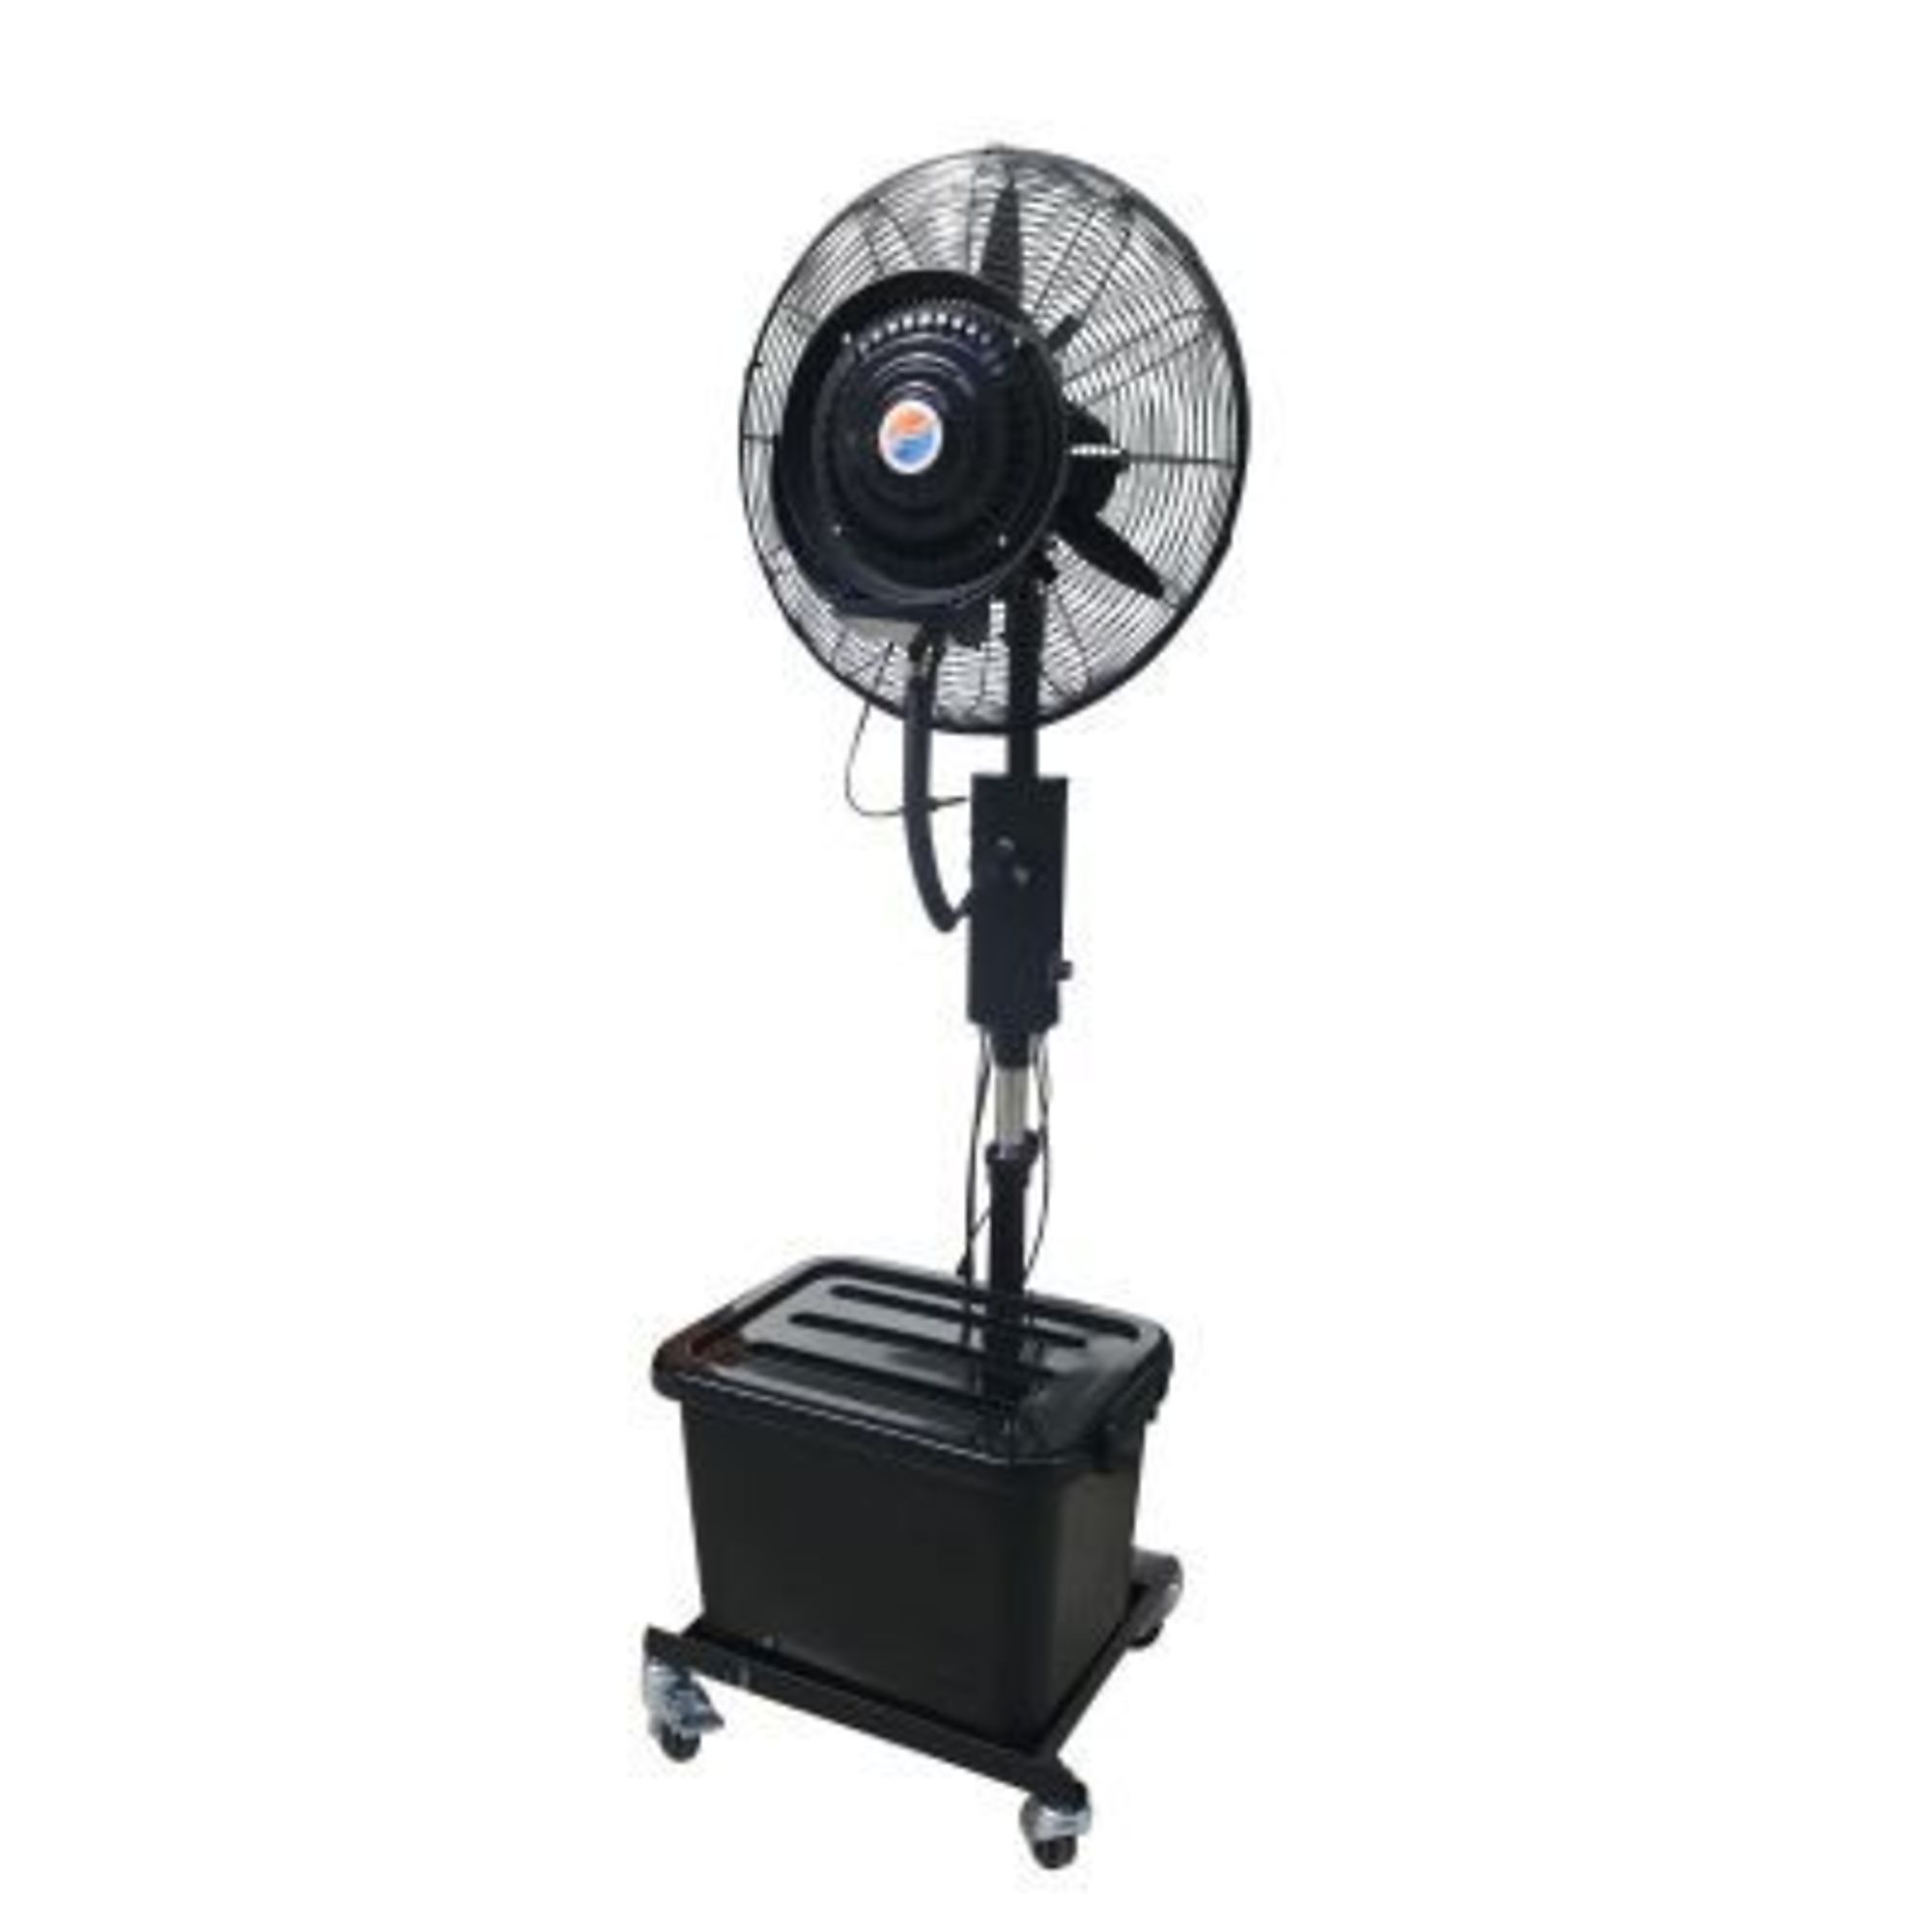 Cool-Off, Portable Misting Fan, Fan Diameter 20 in, Air Delivery 5600 cfm, Oscillating, Model TB20